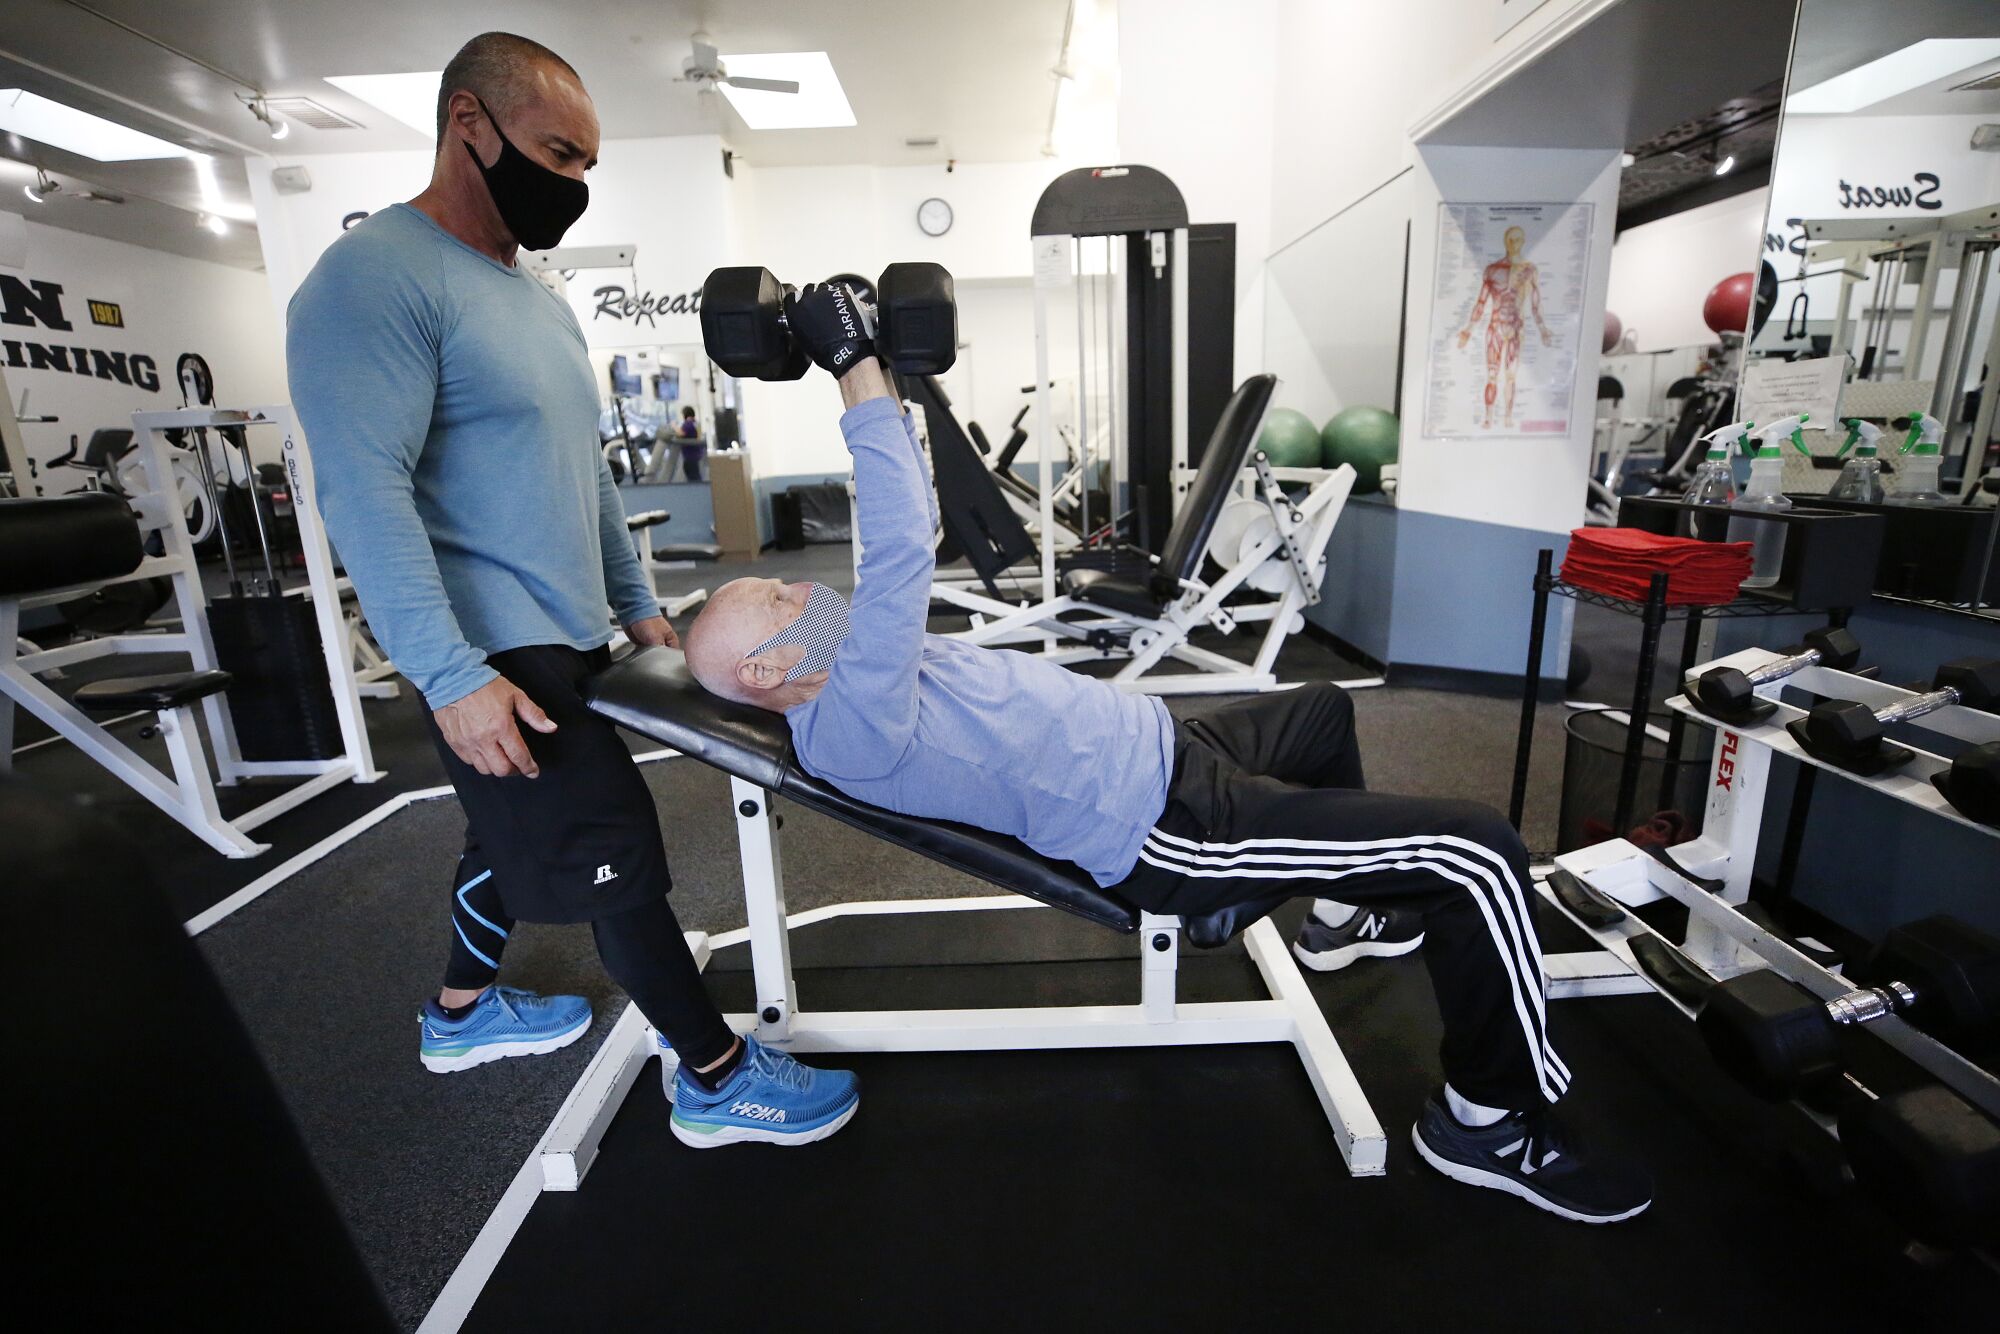 A masked man on a bench lifts dumbbells as another man, left, watches 